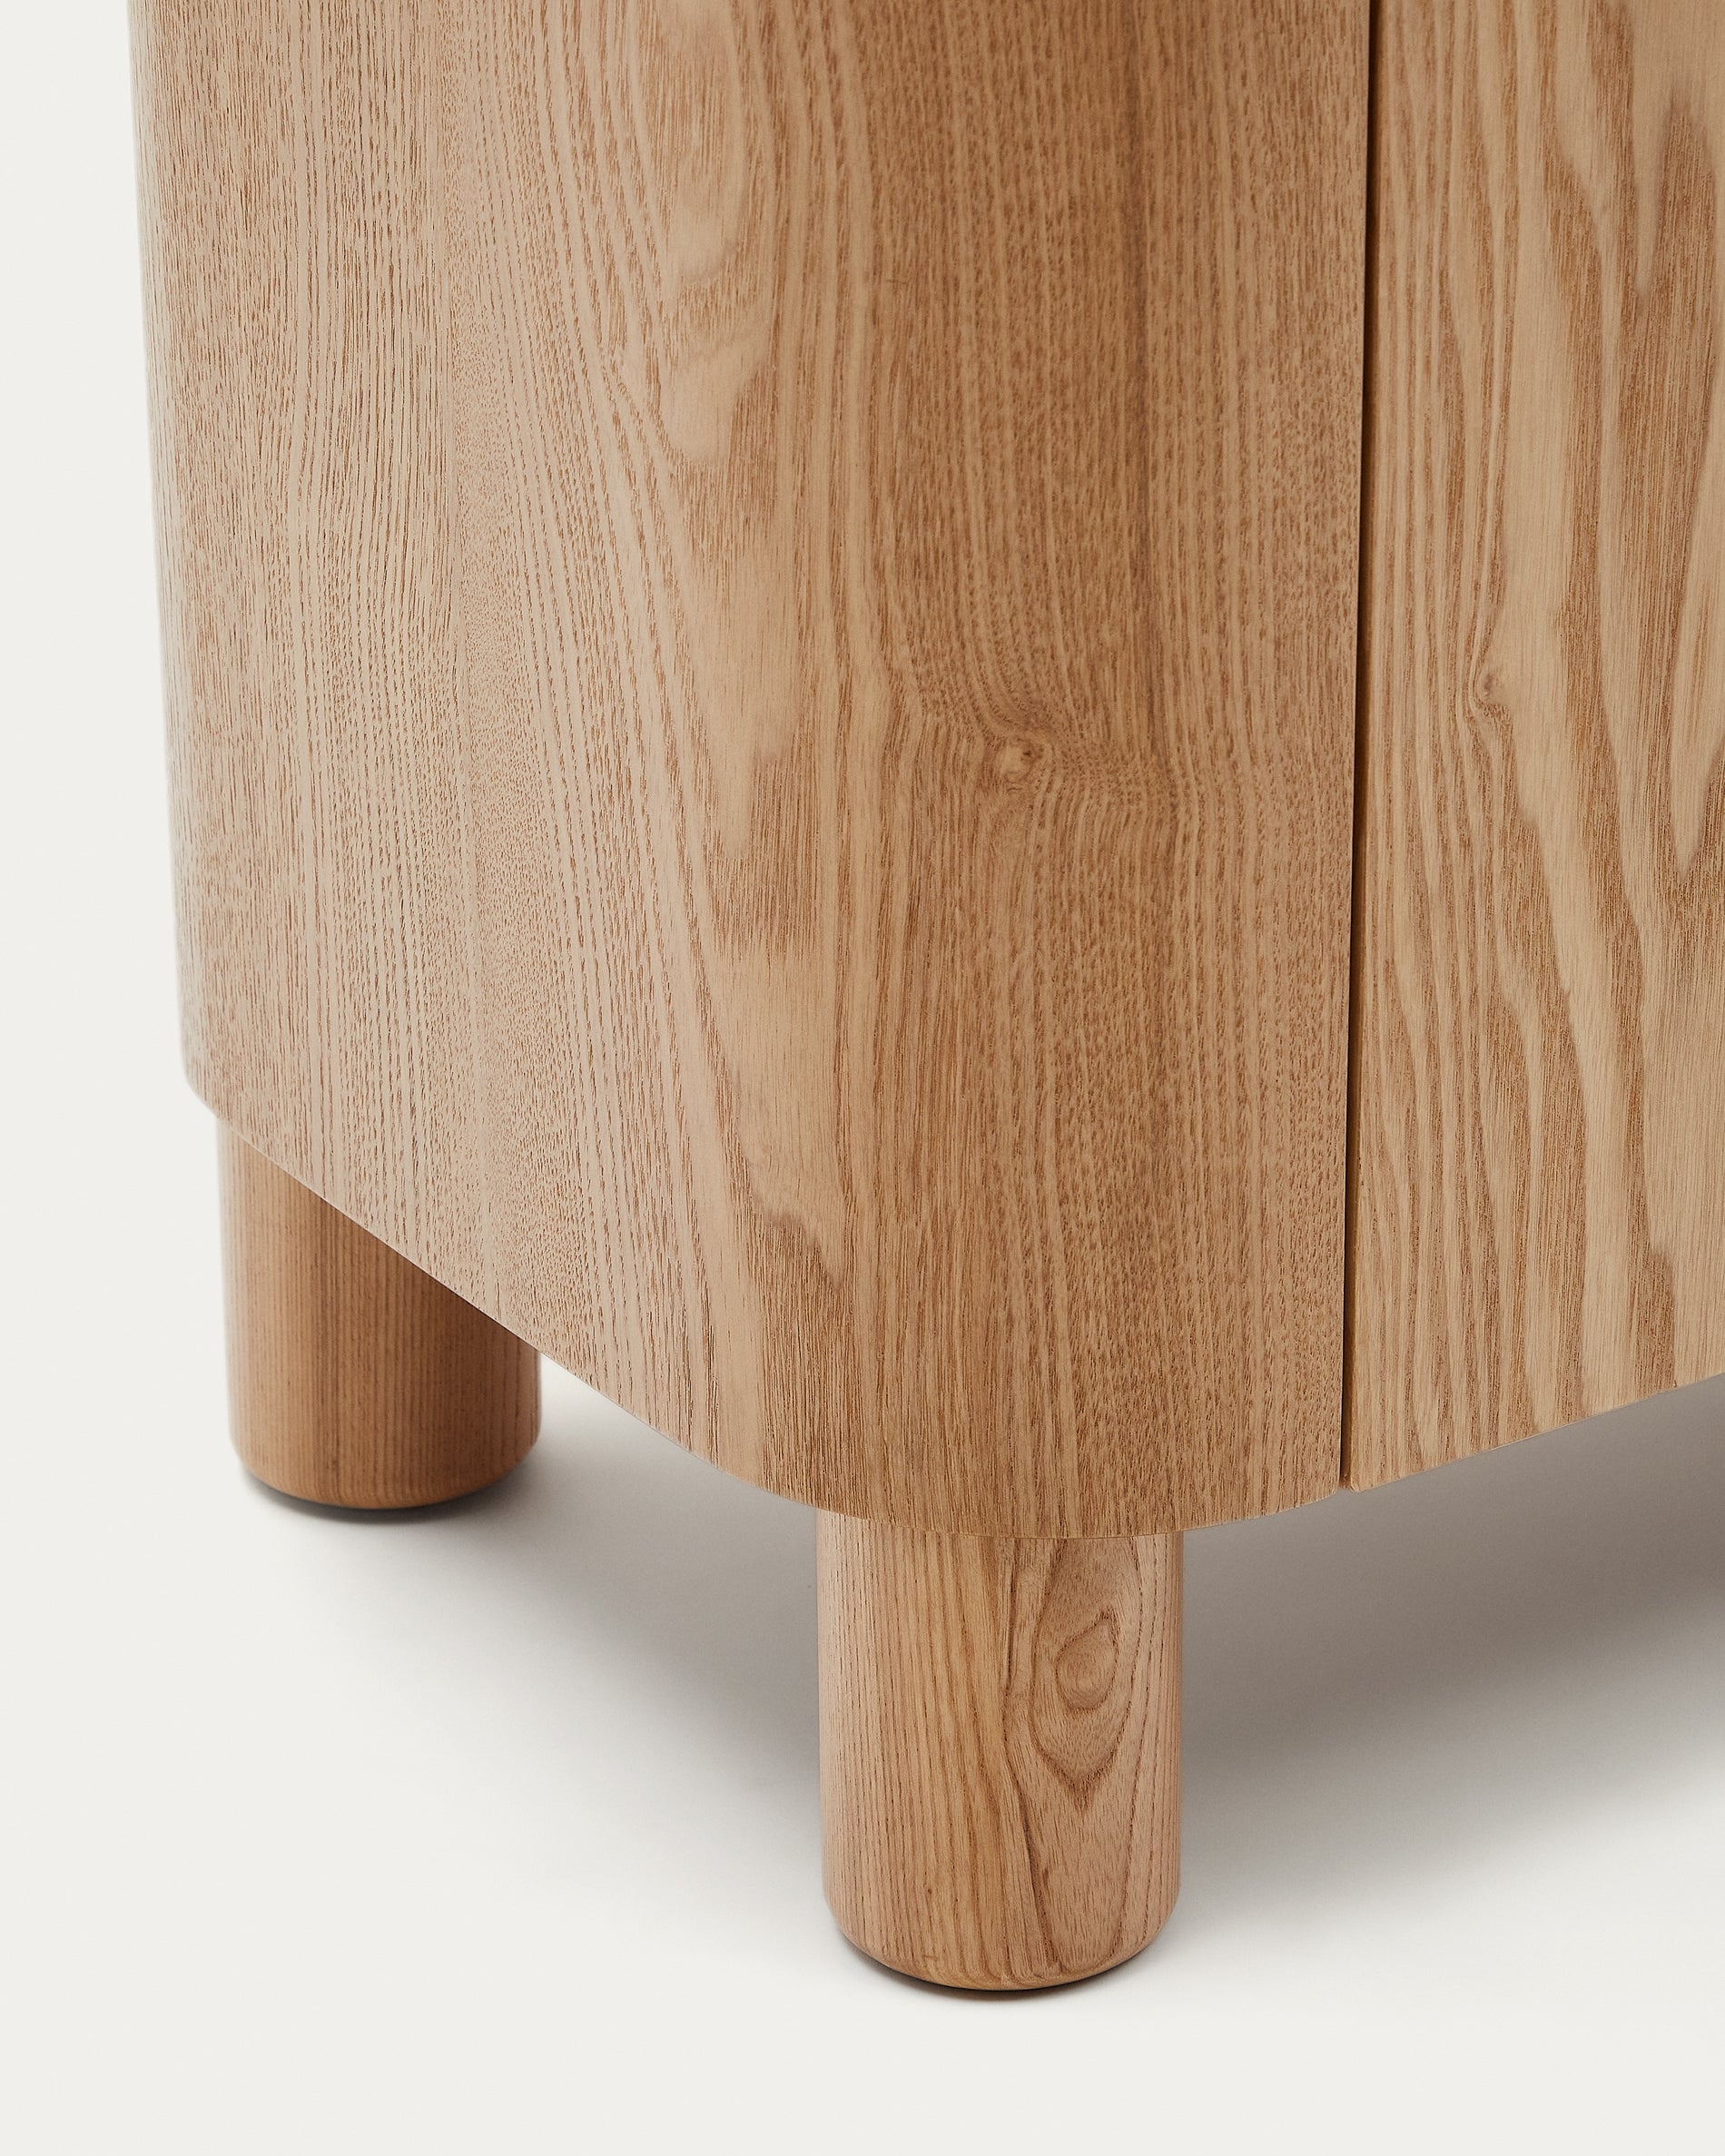 Salaya chest of drawers made of FSC Mix Credit ash plywood 120 x 40 cm